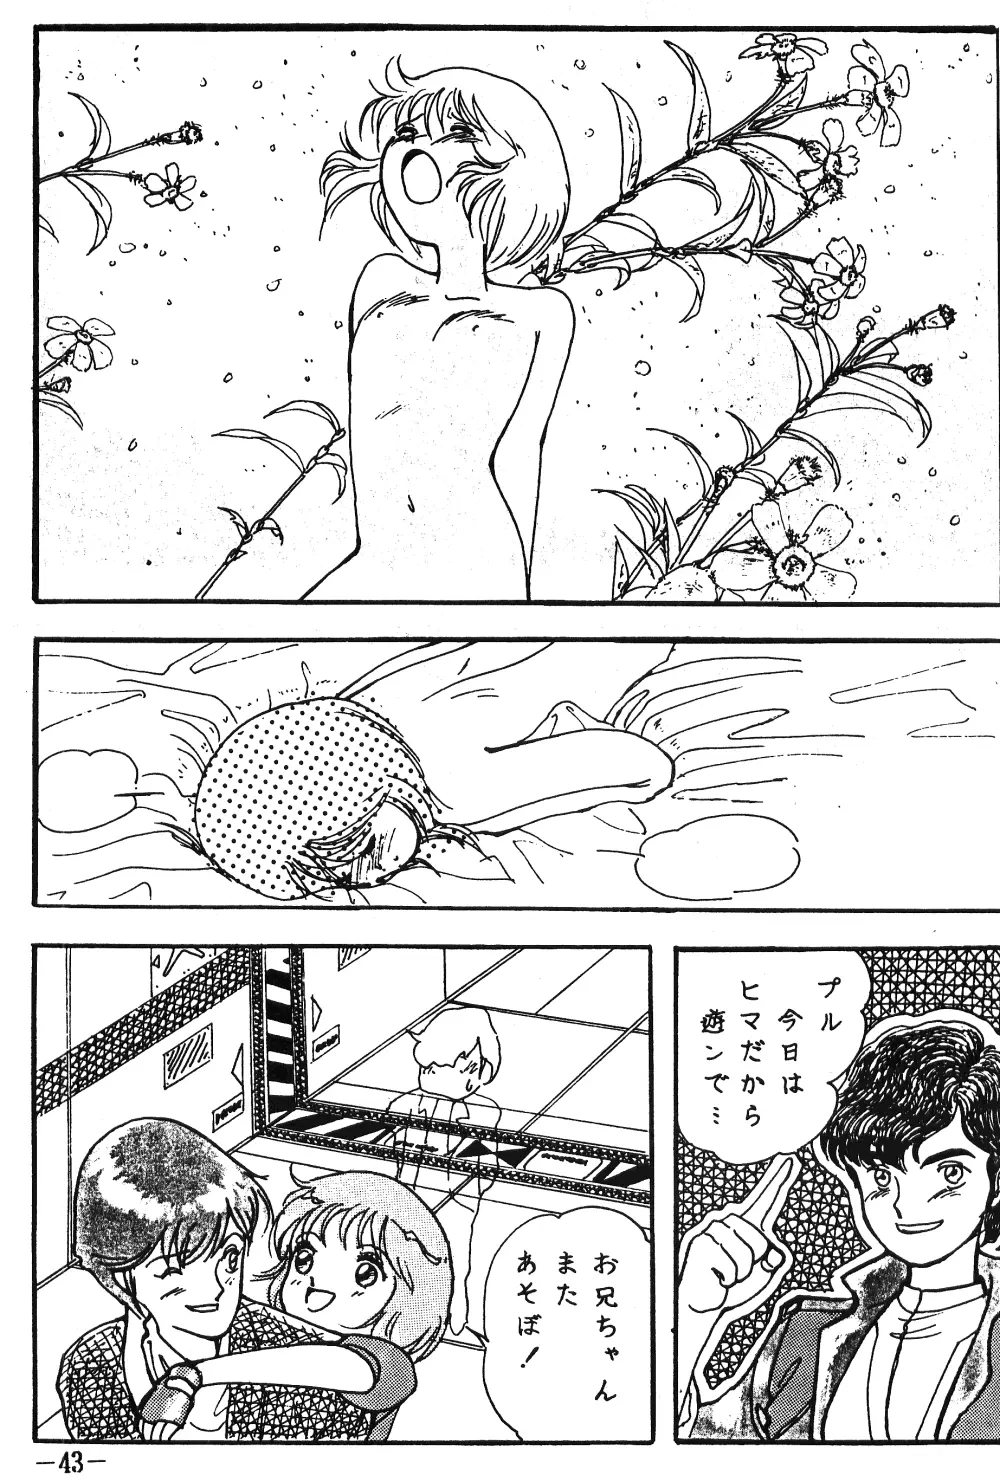 Fro2 Fight Vol. 1 Page.43